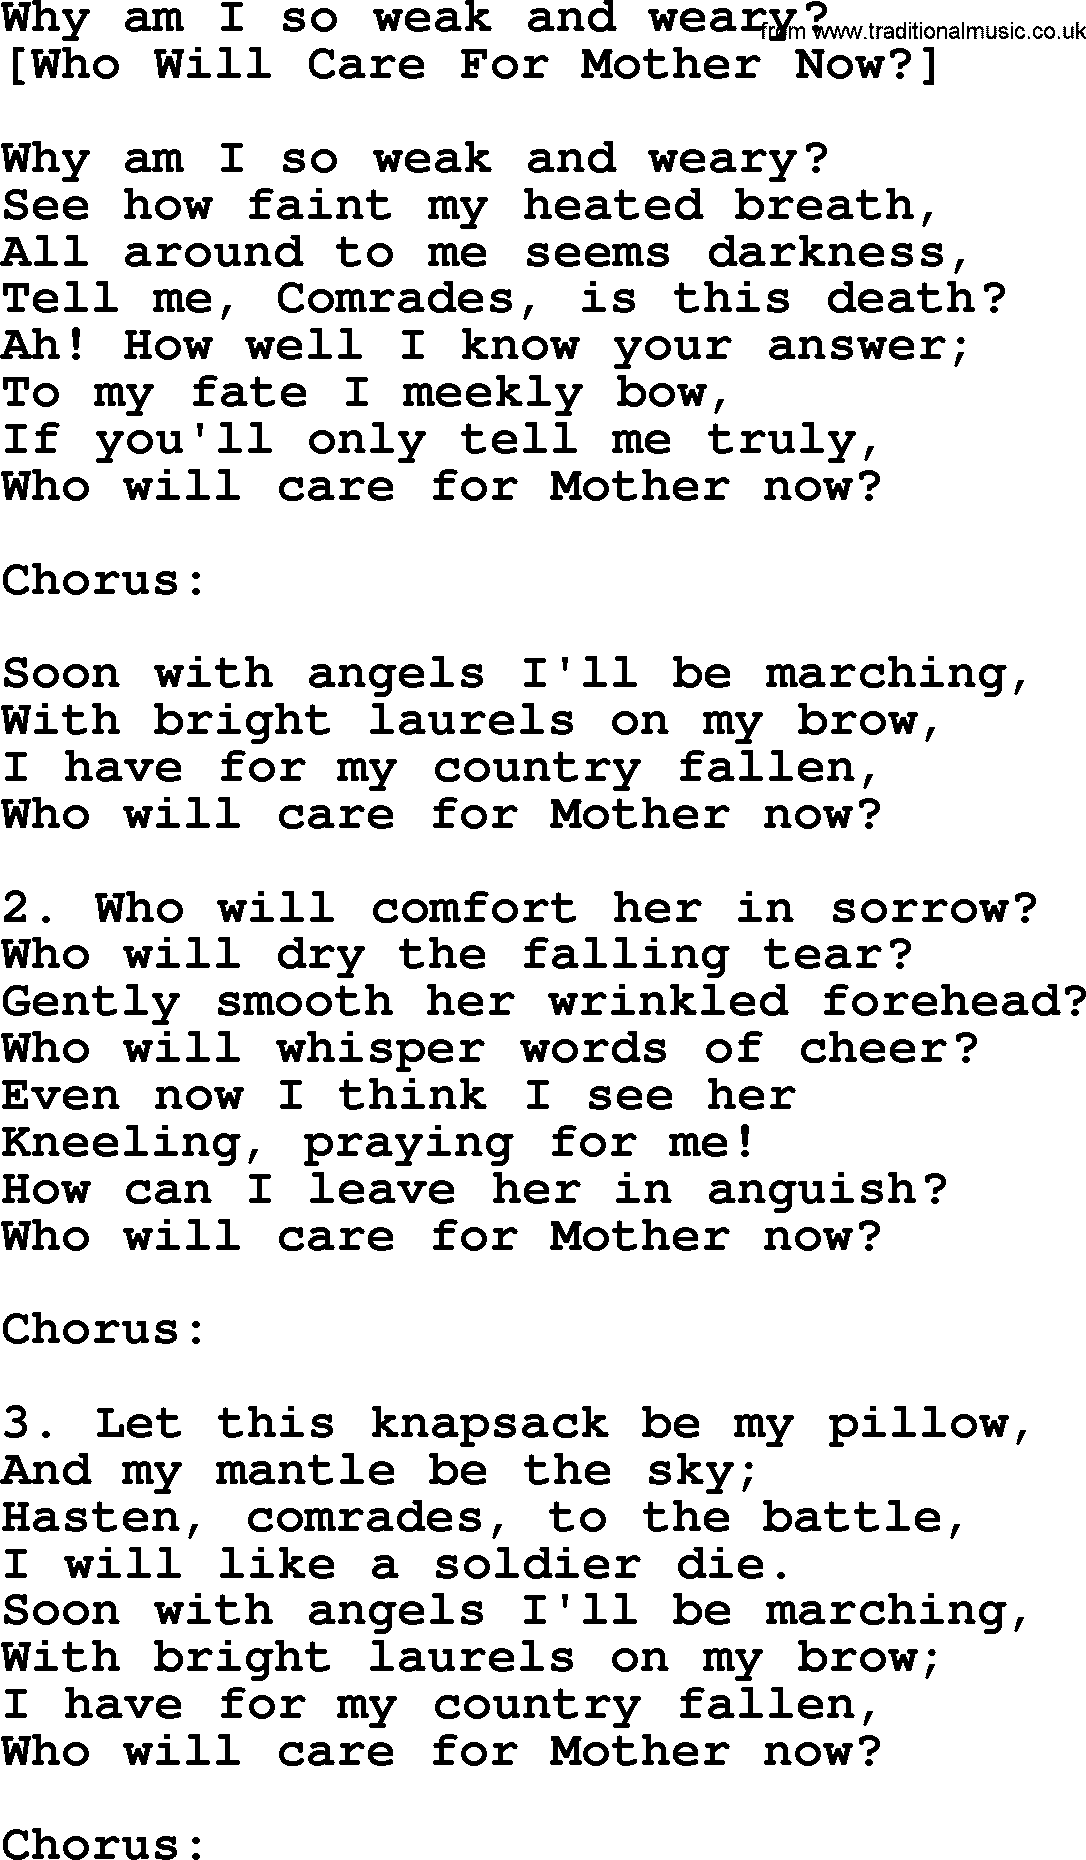 Old American Song: Why Am I So Weak And Weary, lyrics